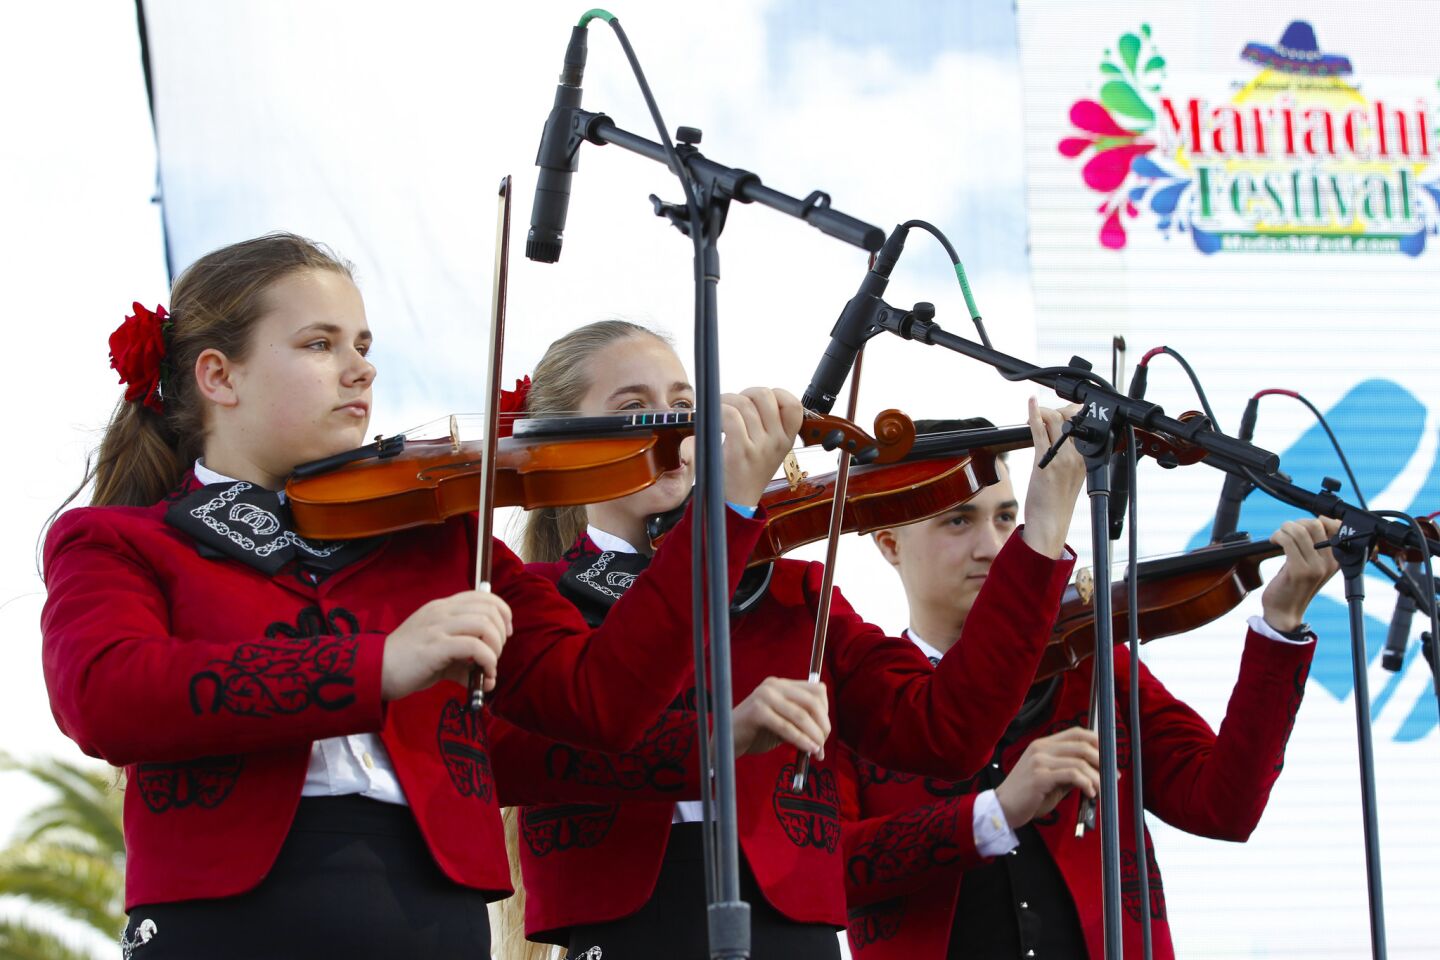 Students from the Mariachi Ambiente group performed during Sunday for the annual International Mariachi Festival in National City.